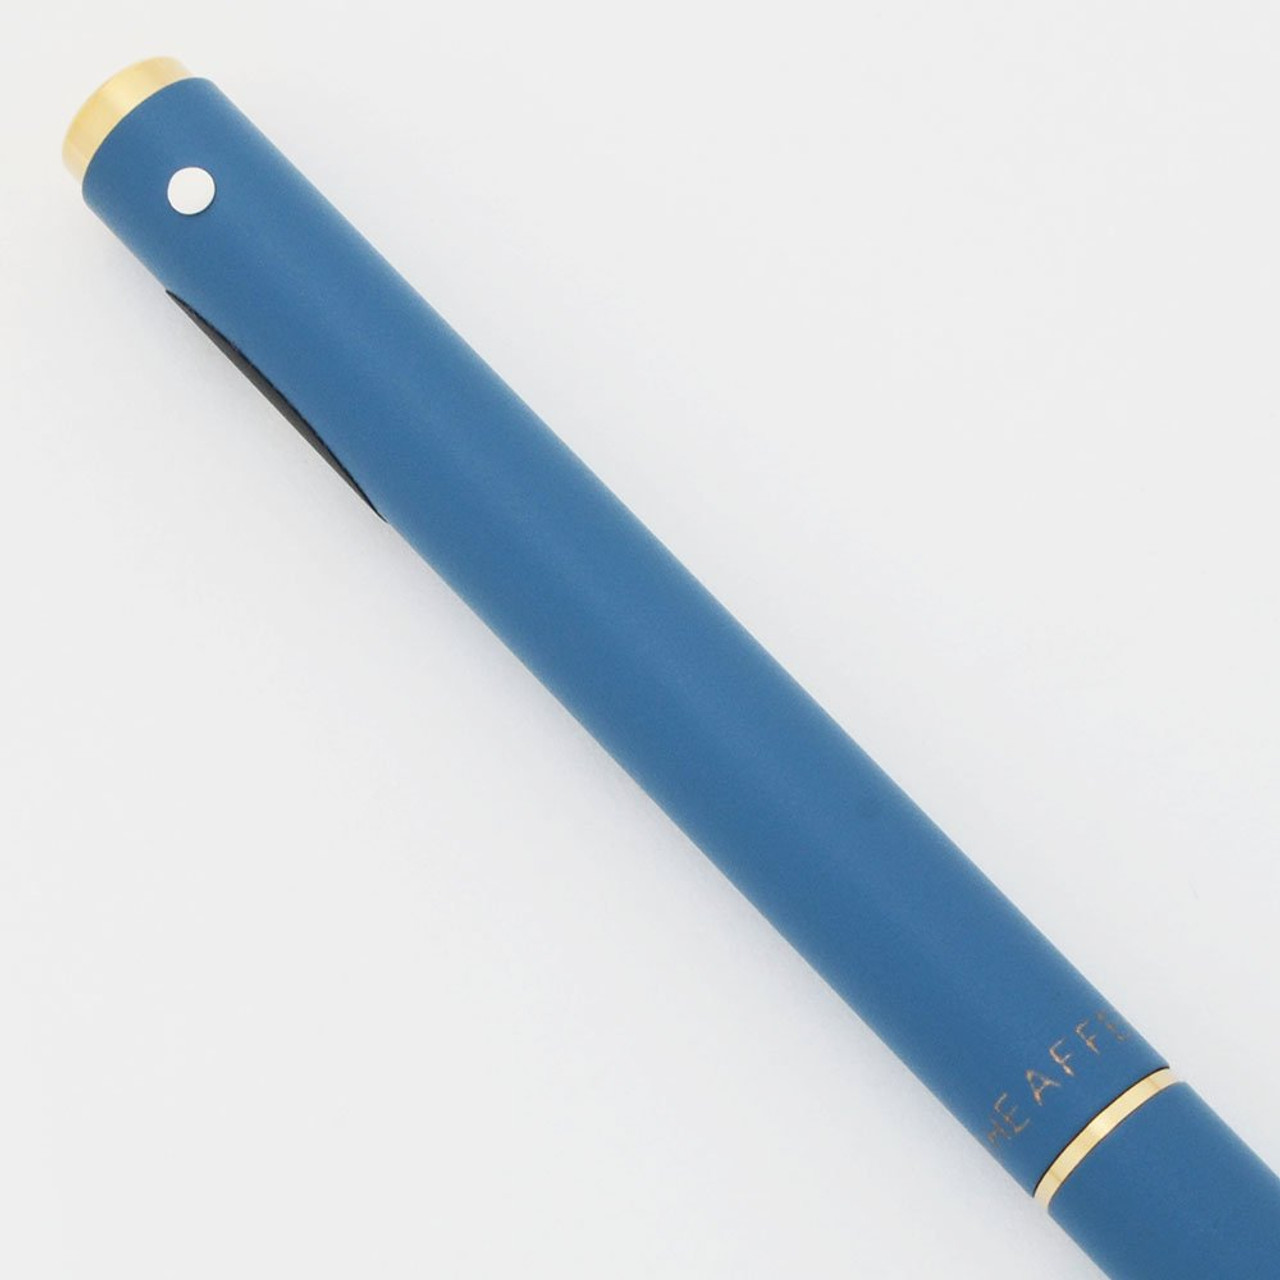 Sheaffer Fashion I 638 Mechanical Pencil - Matte Twilight Blue, No Clip, 0.5mm (New Old Stock, Works Well)